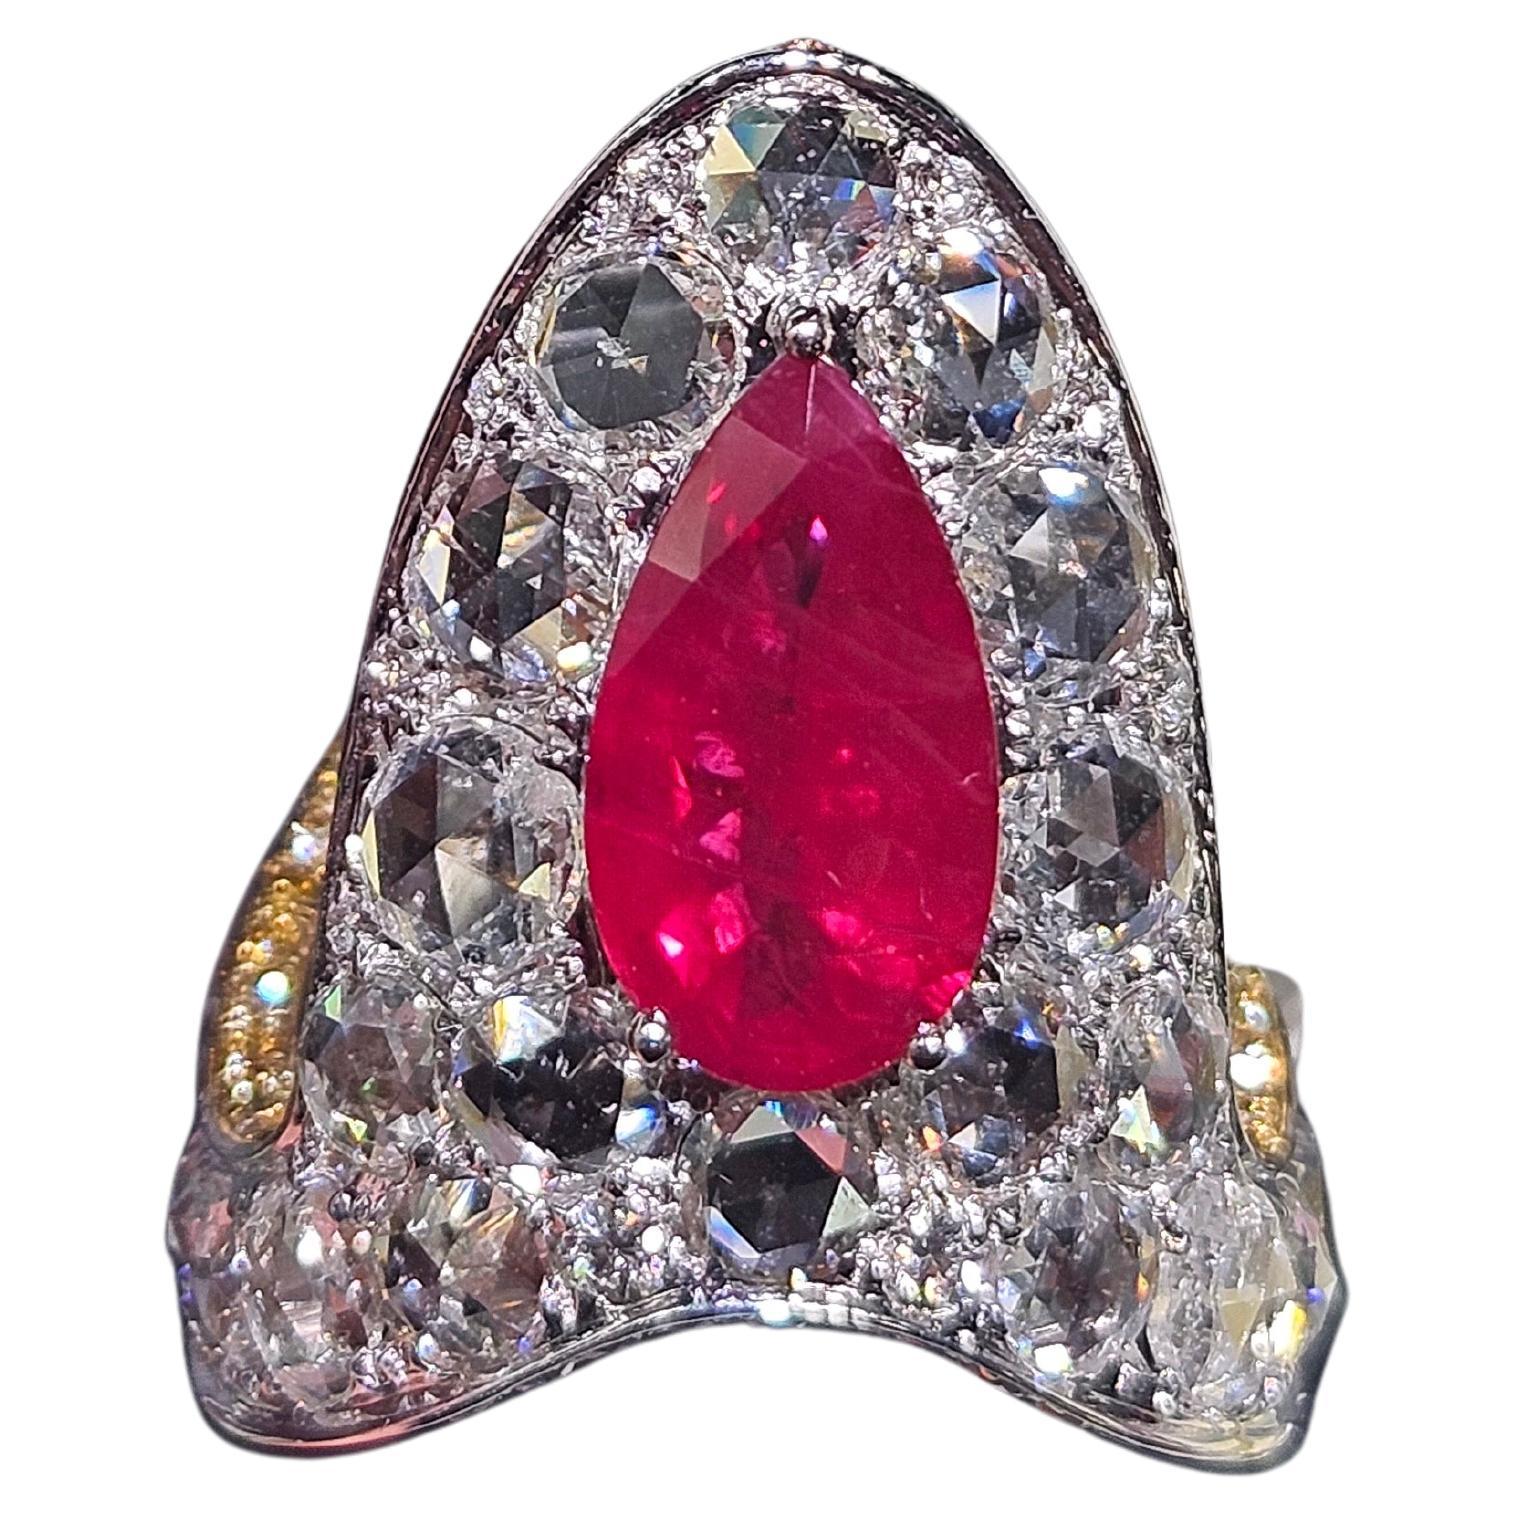 NWT $130, 600 Fancy Large 18KT Gold Glittering Ruby Rose Diamond Cocktail Ring For Sale